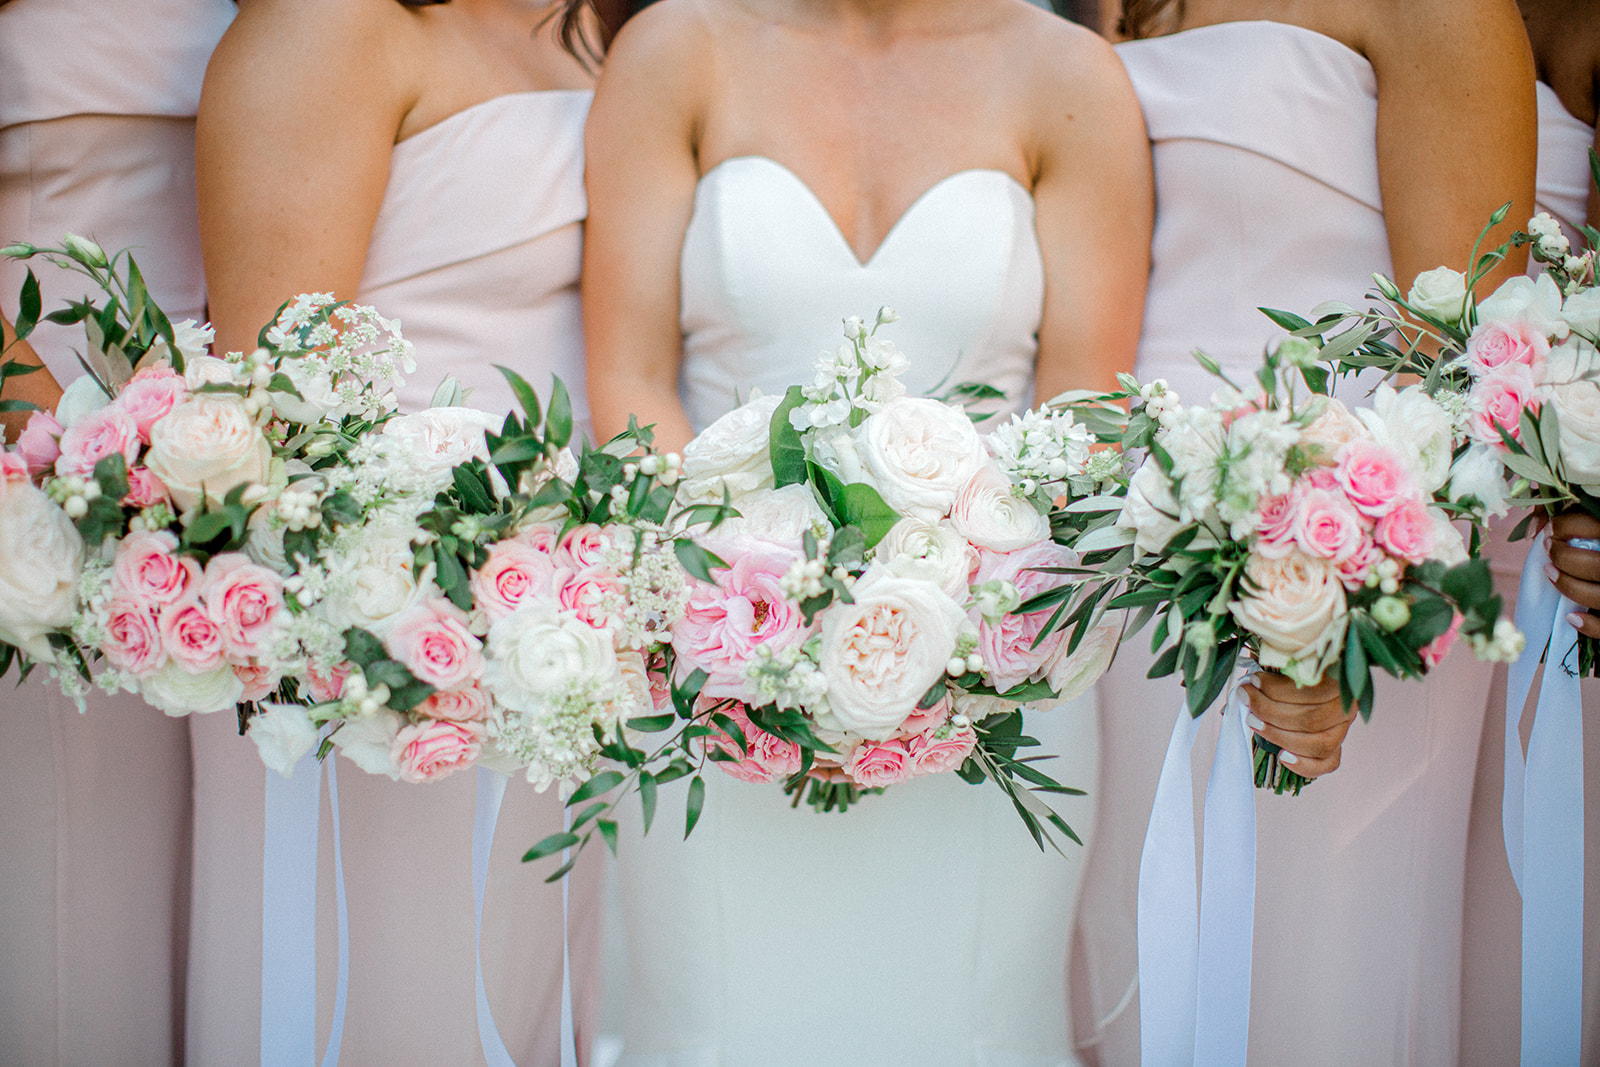 Pink and white wedding bouquets